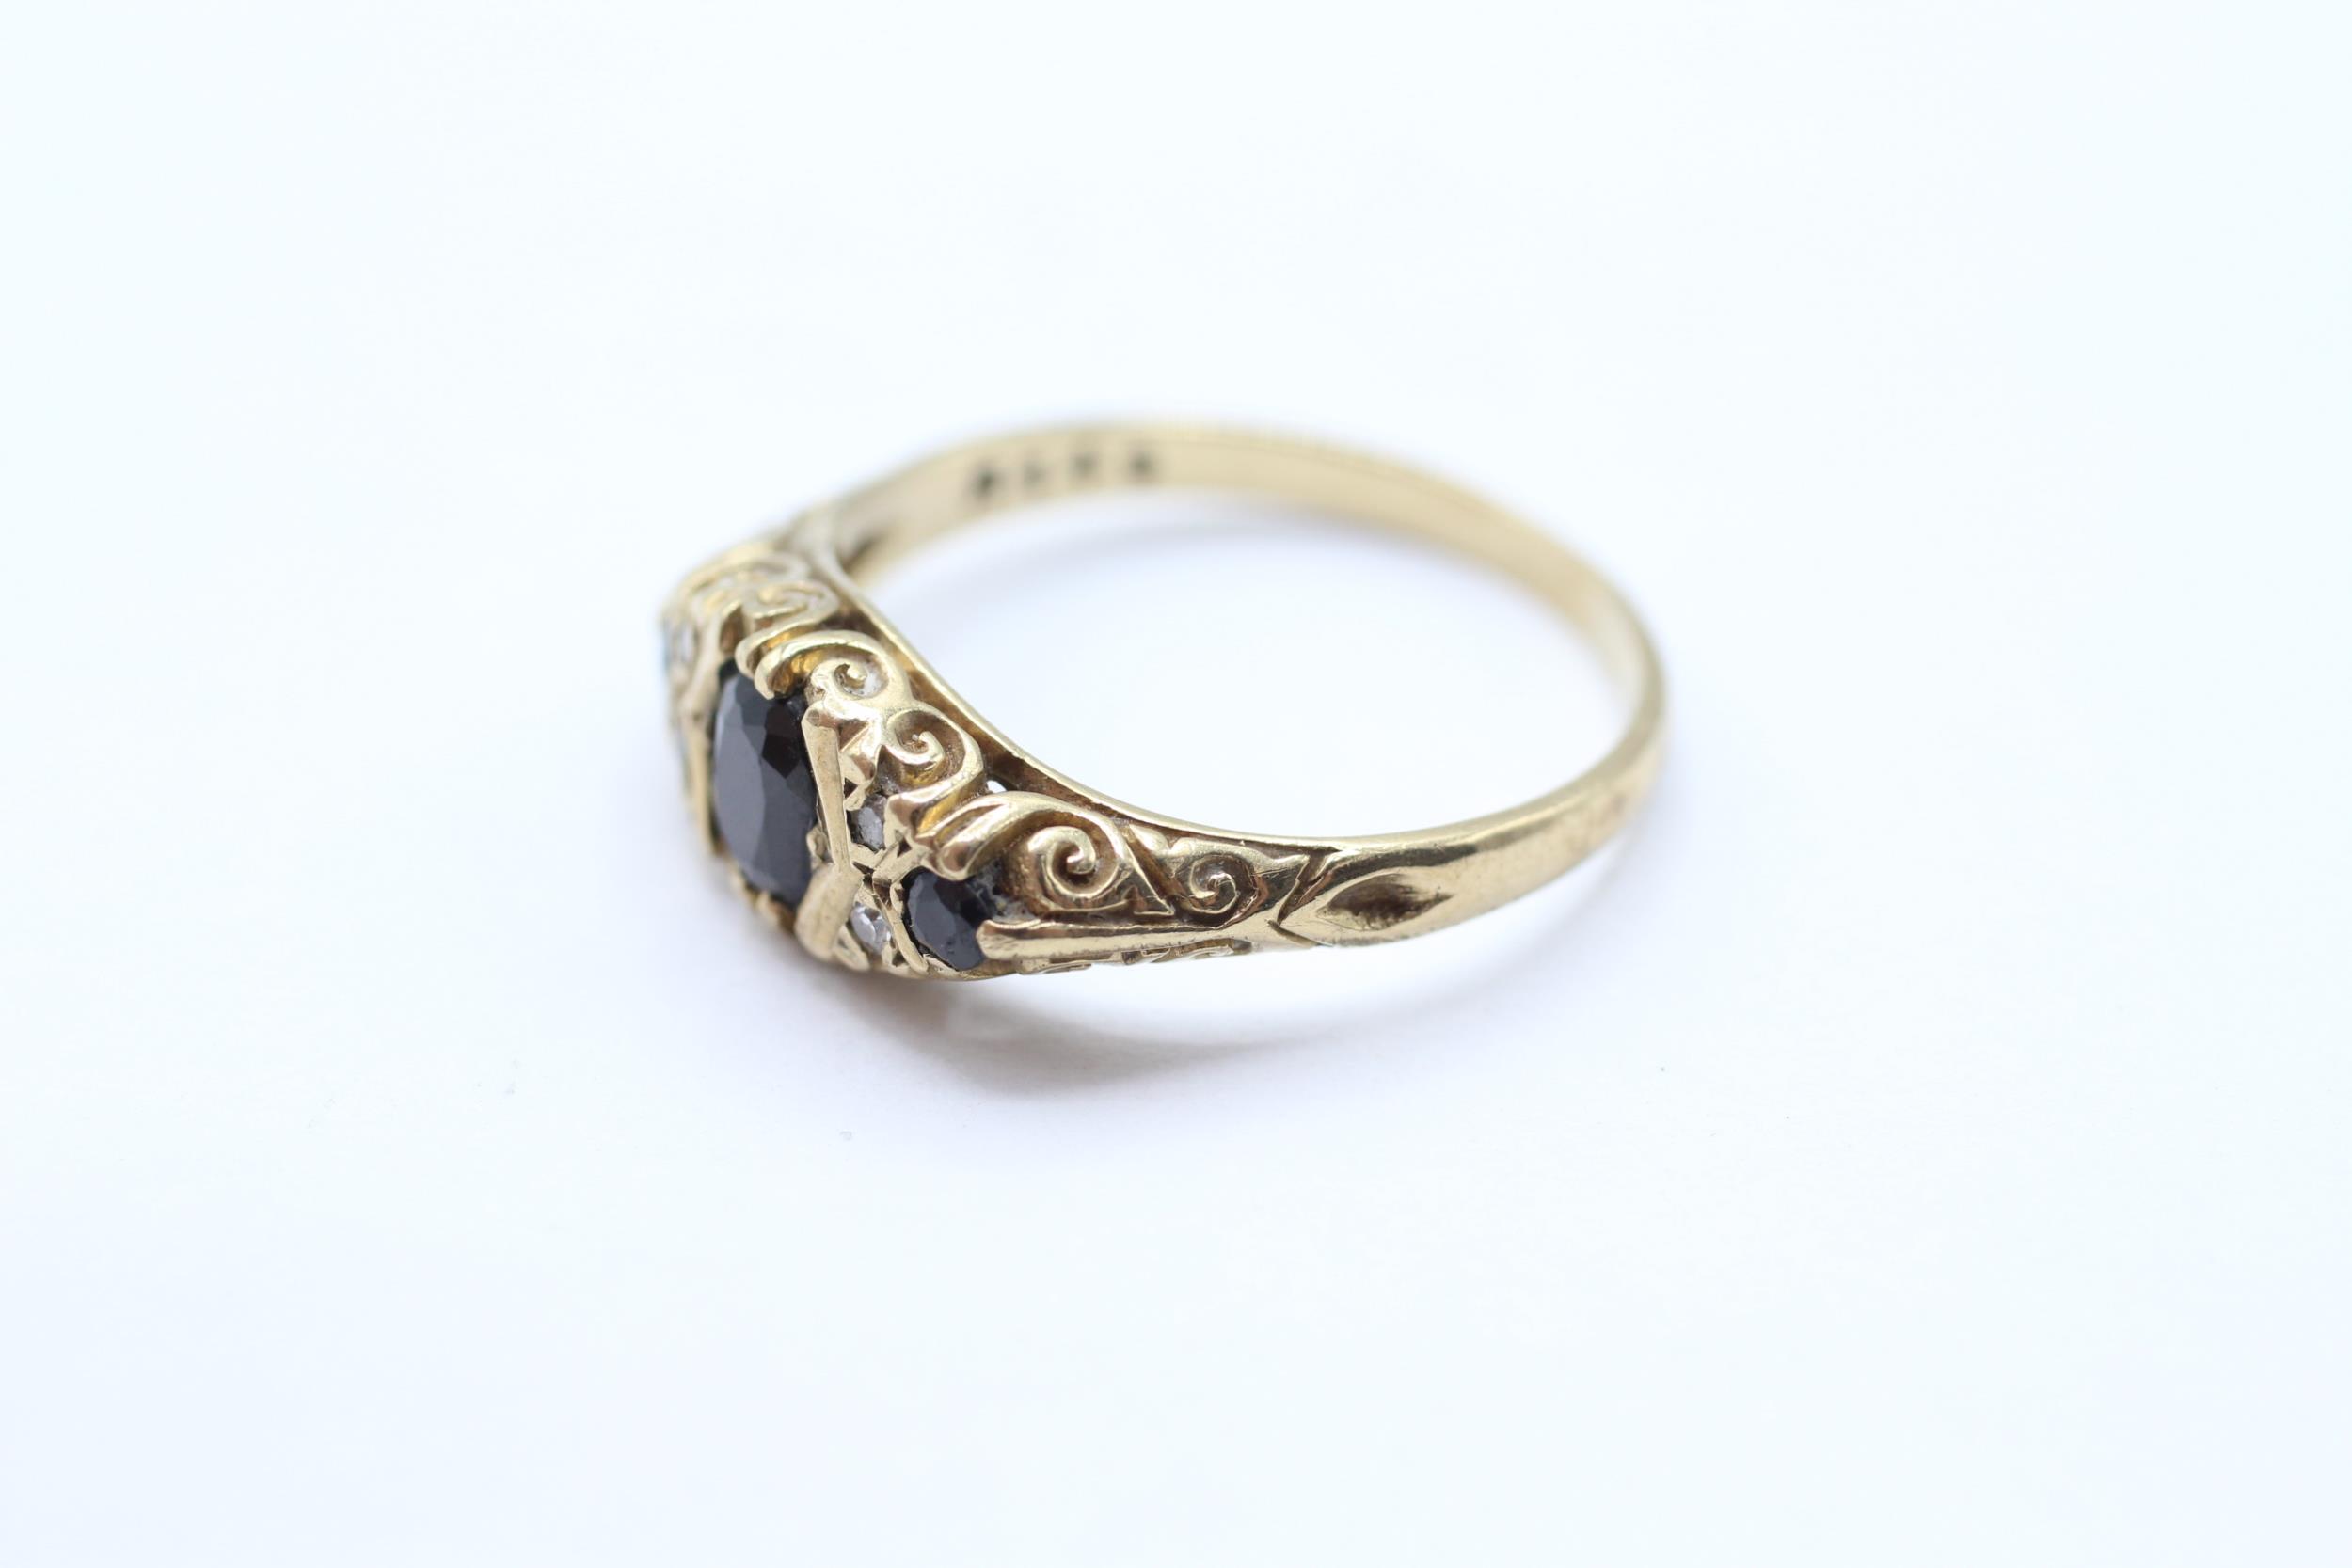 9ct gold vintage sapphire & diamond ring with a scroll patterned gallery Size P 2.5 g - Image 4 of 5